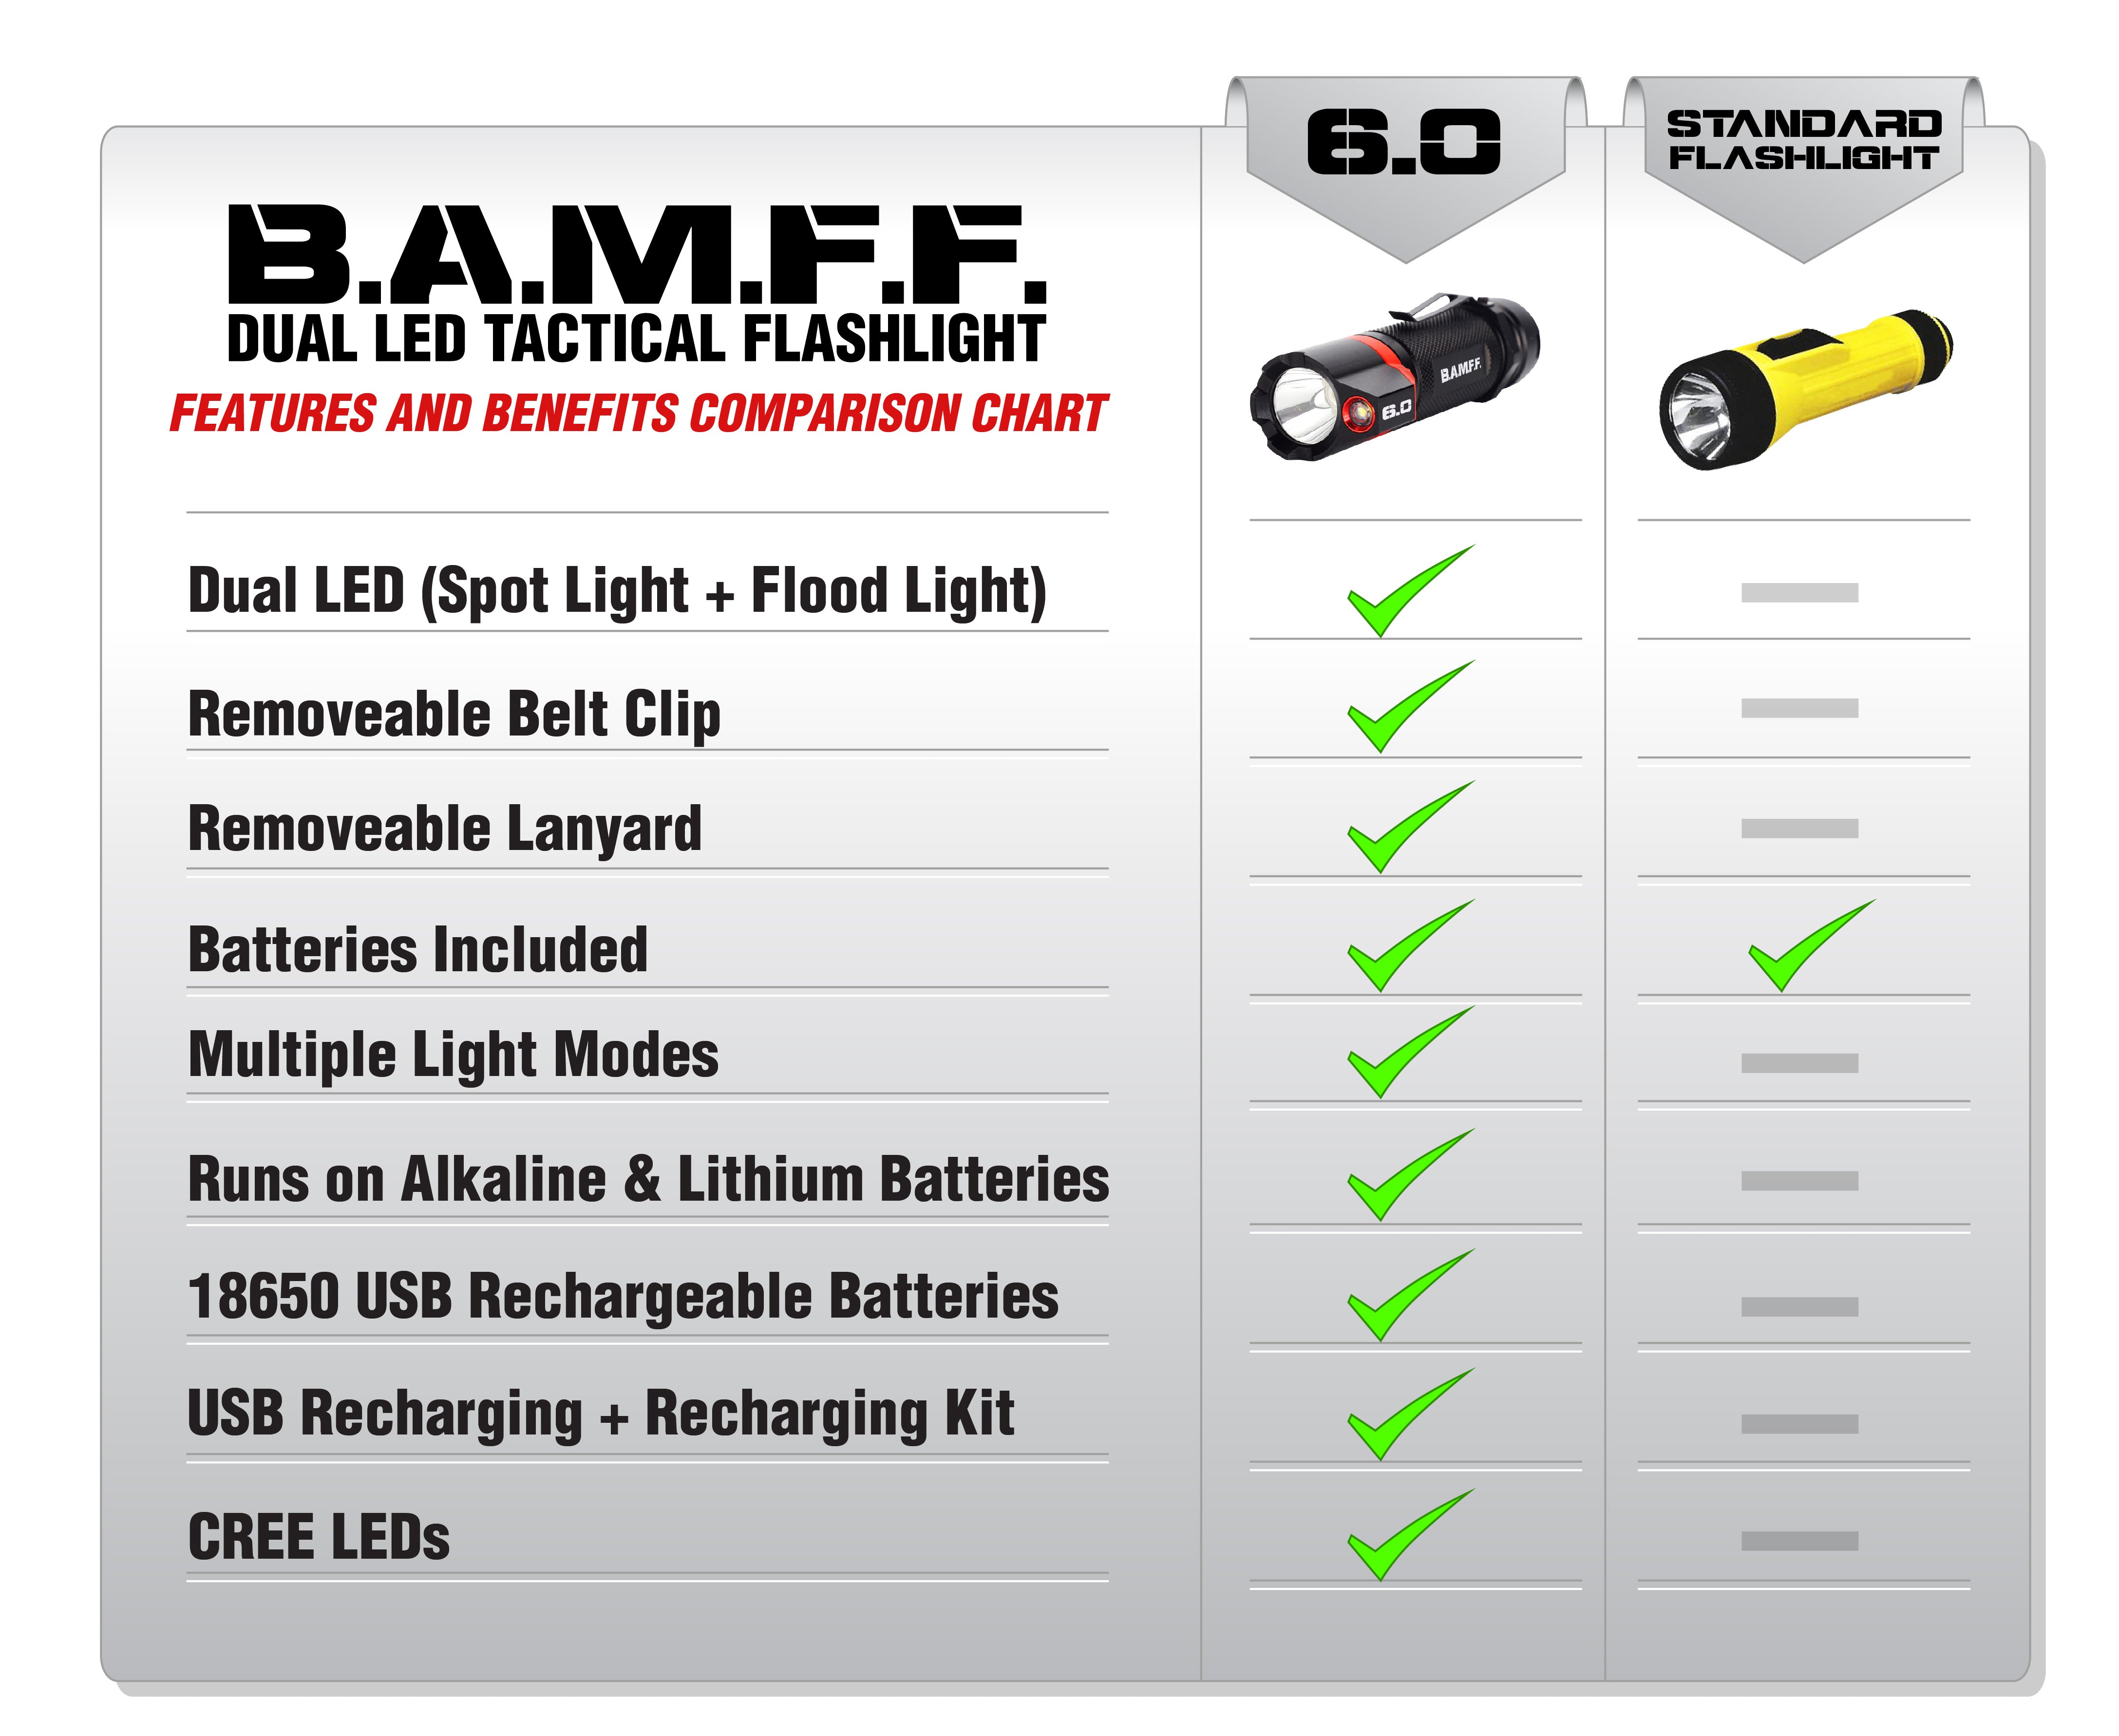 A chart showing why the BAMFF 6.0 Tactical Flashlight is better than a standard flashlight. The only feature that they both share a check mark in is Batteries Included. All the rest only the BAMFF has check marks in. Those include: Dual LED (spot light + flood light), removeable belt clip, removeable lanyard, batteries included, multiple light modes, runs on alkaline & lithium batteries, 18650 USB rechargeable batteries, USB Recharging + Recharging Kit, and CREE LEDs.